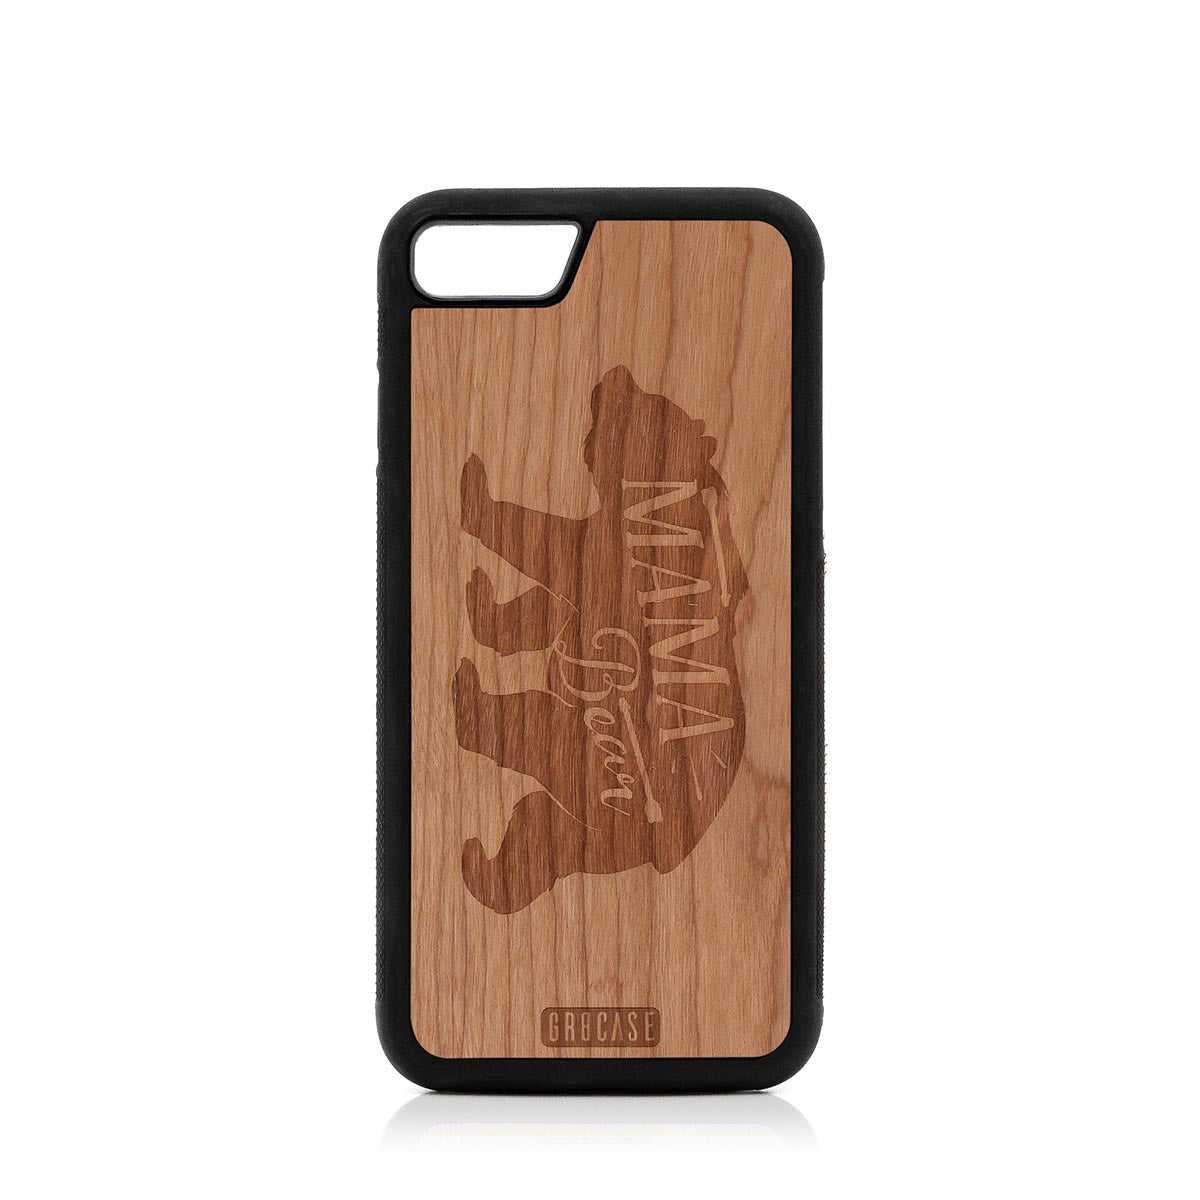 Mama Bear Design Wood Case For iPhone 7/8 by GR8CASE